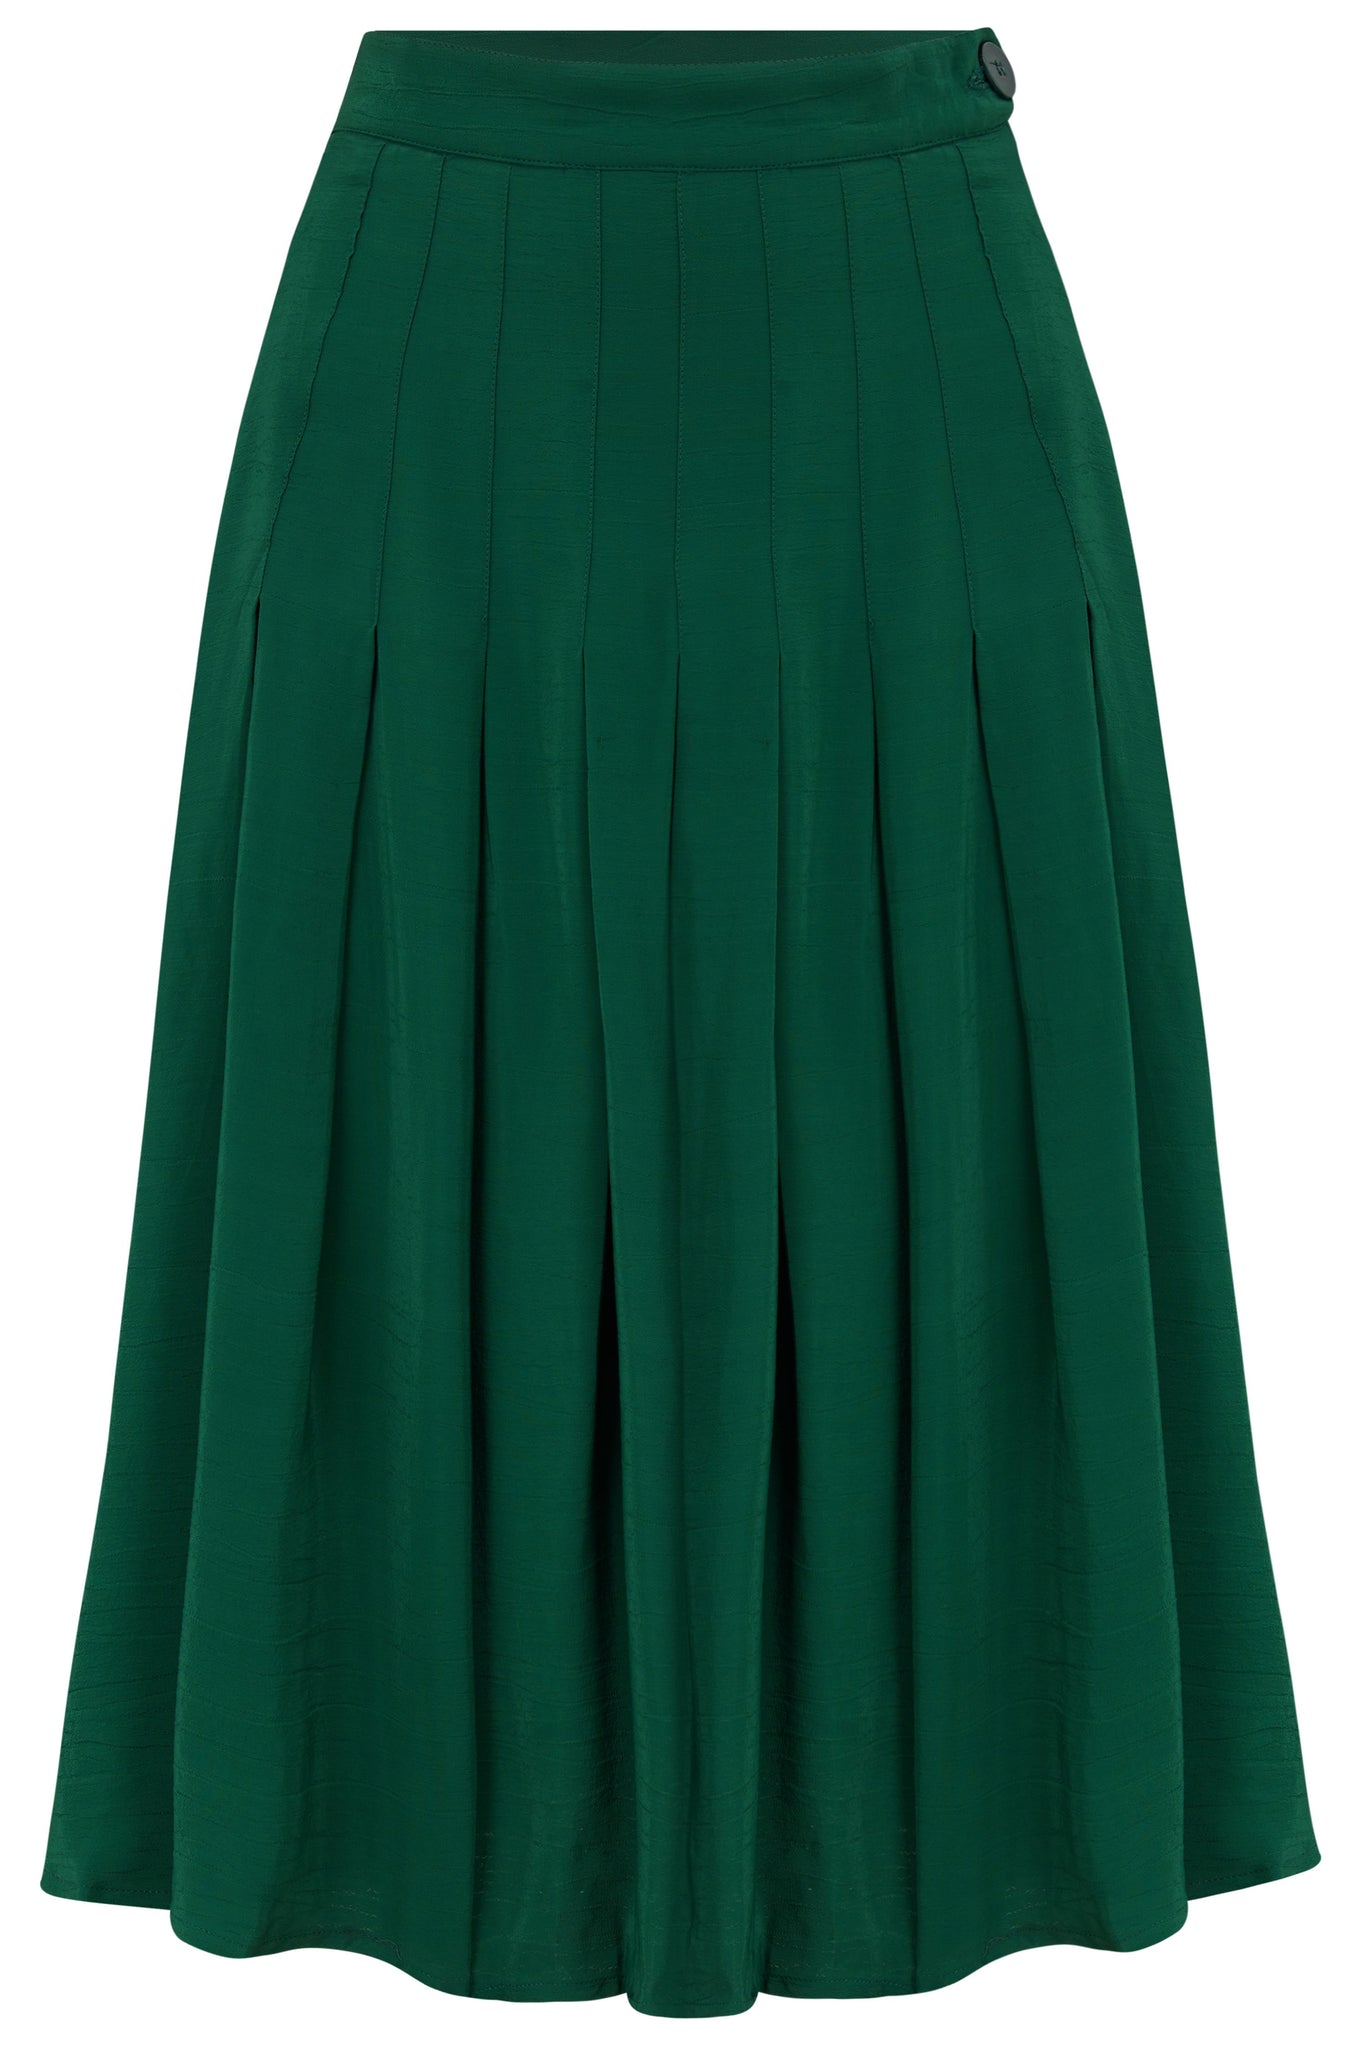 The "Lucille" Pleated Skirt in Solid Green, Classic & Authentic 1940s Vintage Inspired Style - CC41, Goodwood Revival, Twinwood Festival, Viva Las Vegas Rockabilly Weekend Rock n Romance The Seamstress Of Bloomsbury